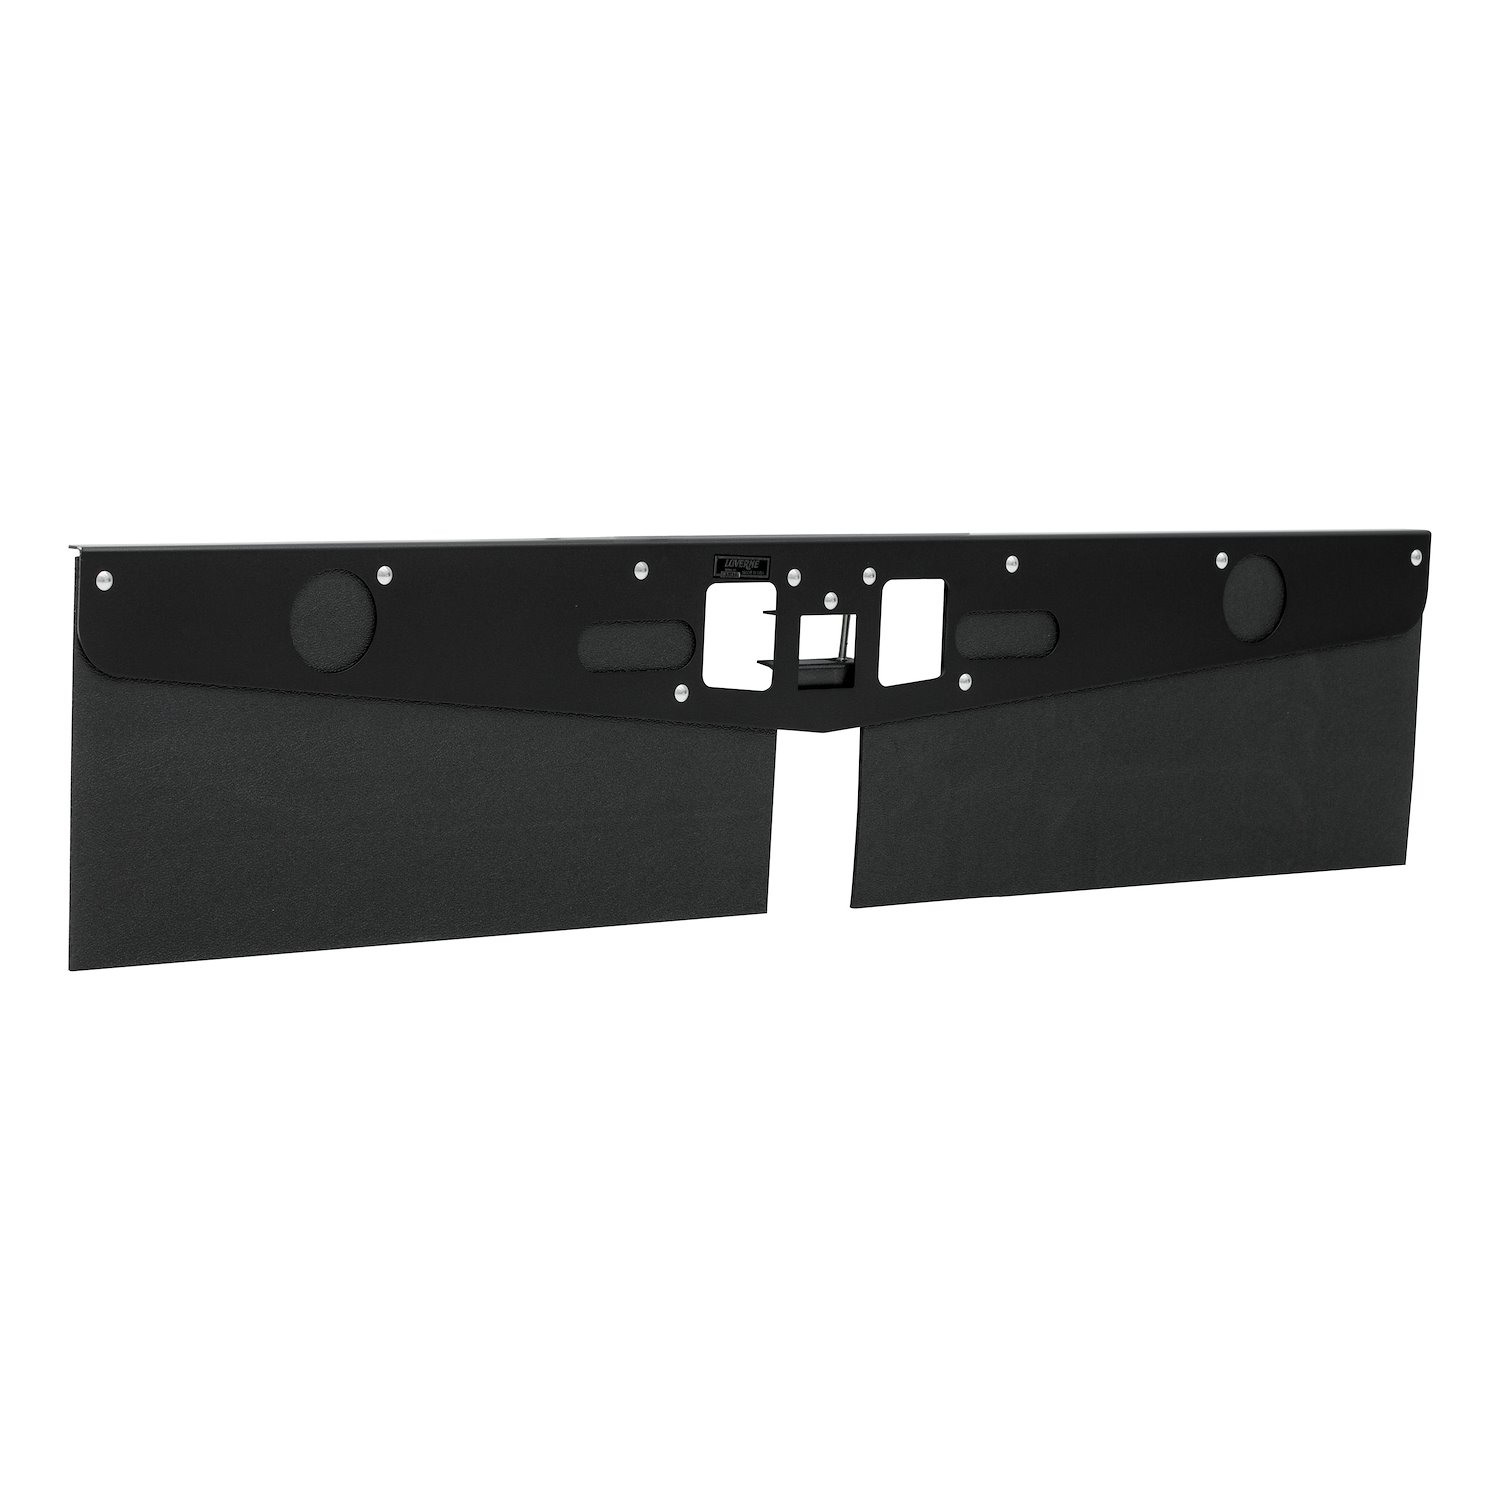 255200 15 in. Long Hitch-Mounted Textured Rubber Tow Guard Fits 2 in., 2-1/2 in. or 3 in. Shank)